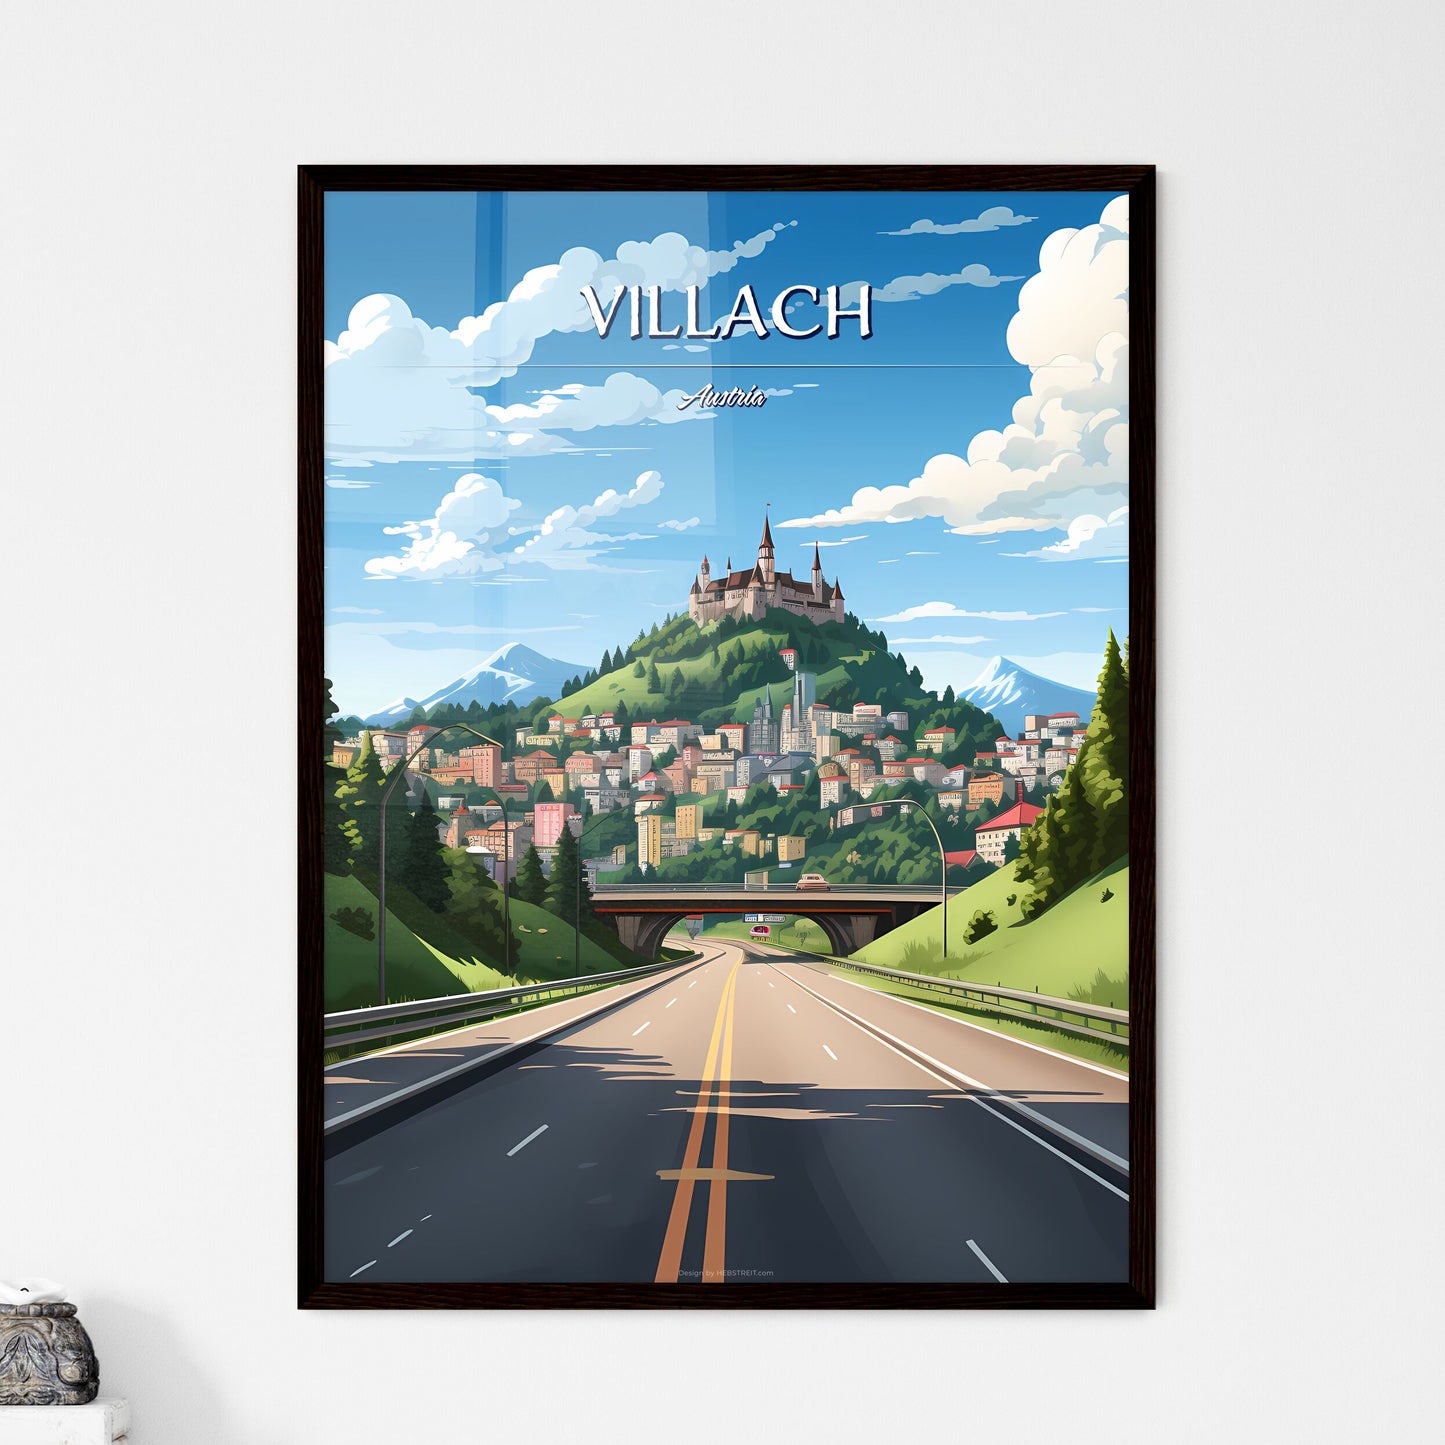 Villach, Austria - Art print of a road with a castle on top of a hill Default Title